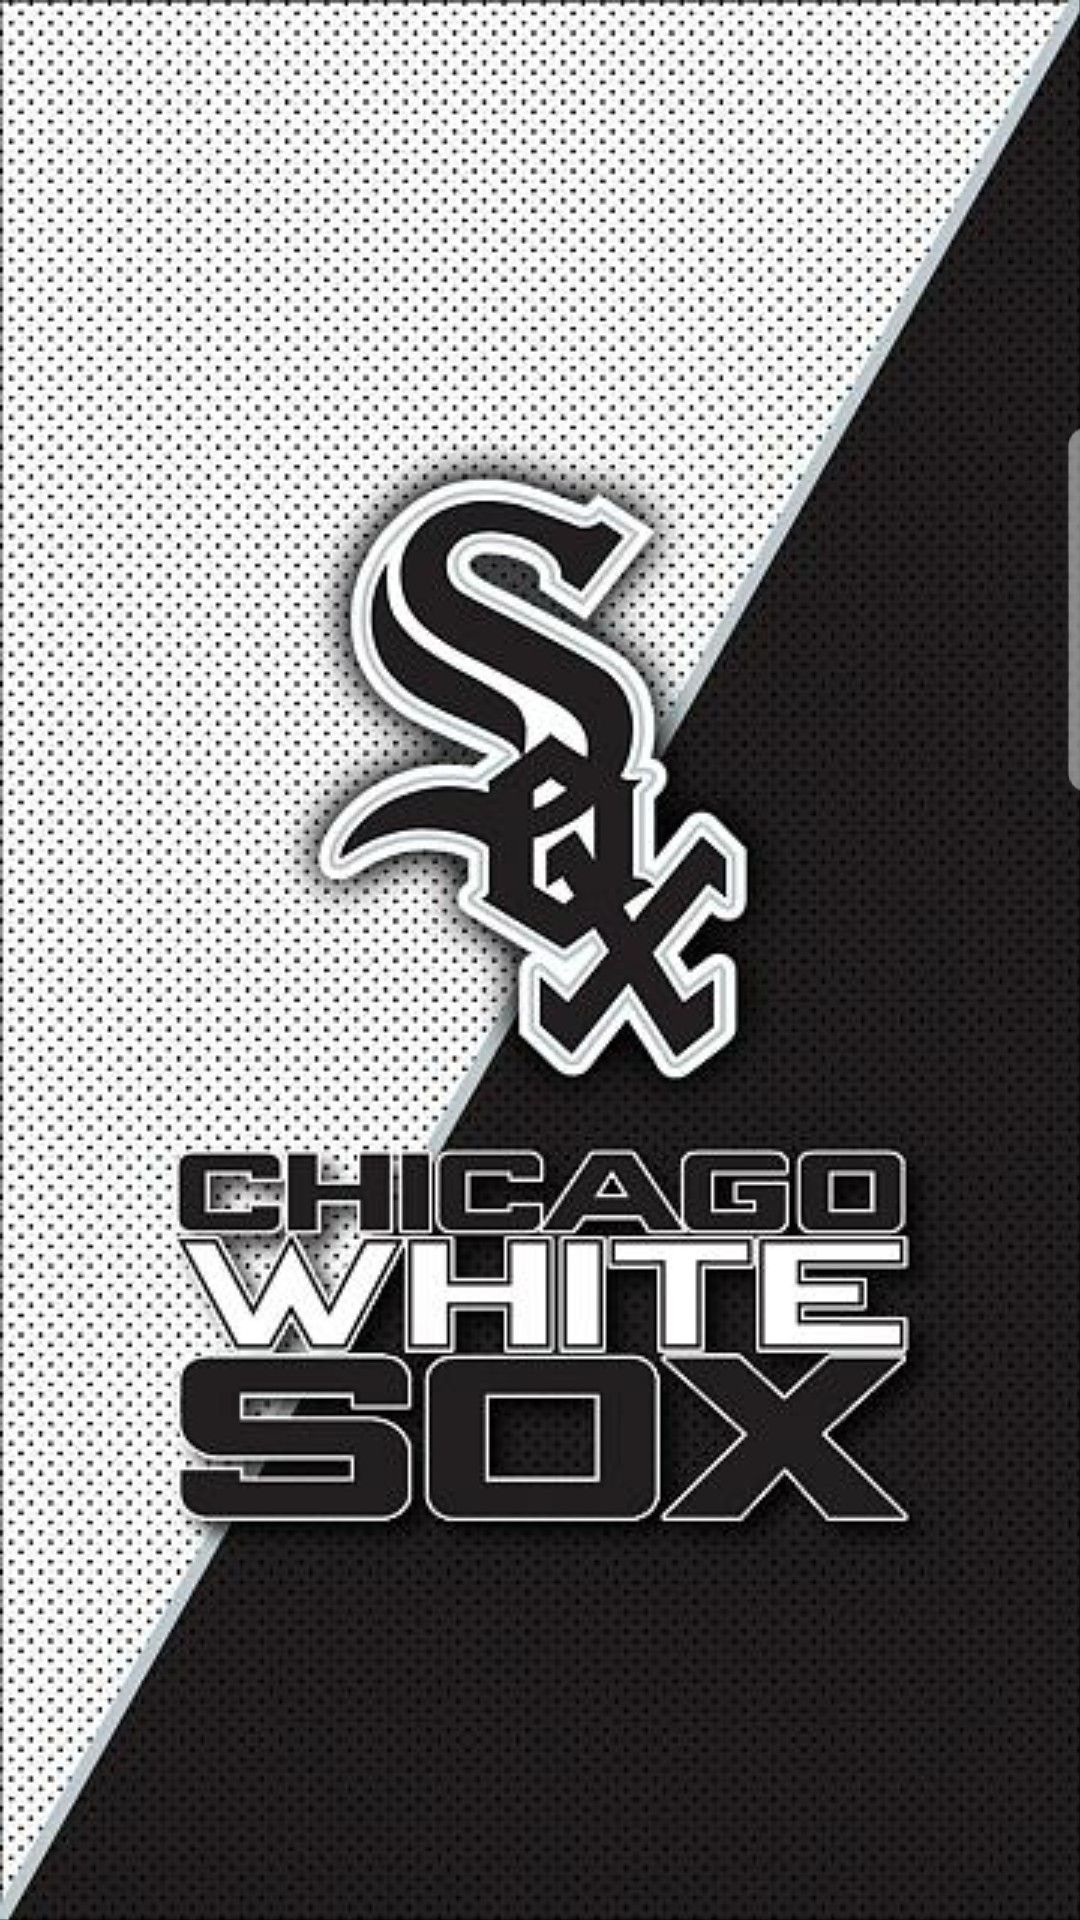 Chicago White Sox Wallpaper Iphone - HD Wallpaper 